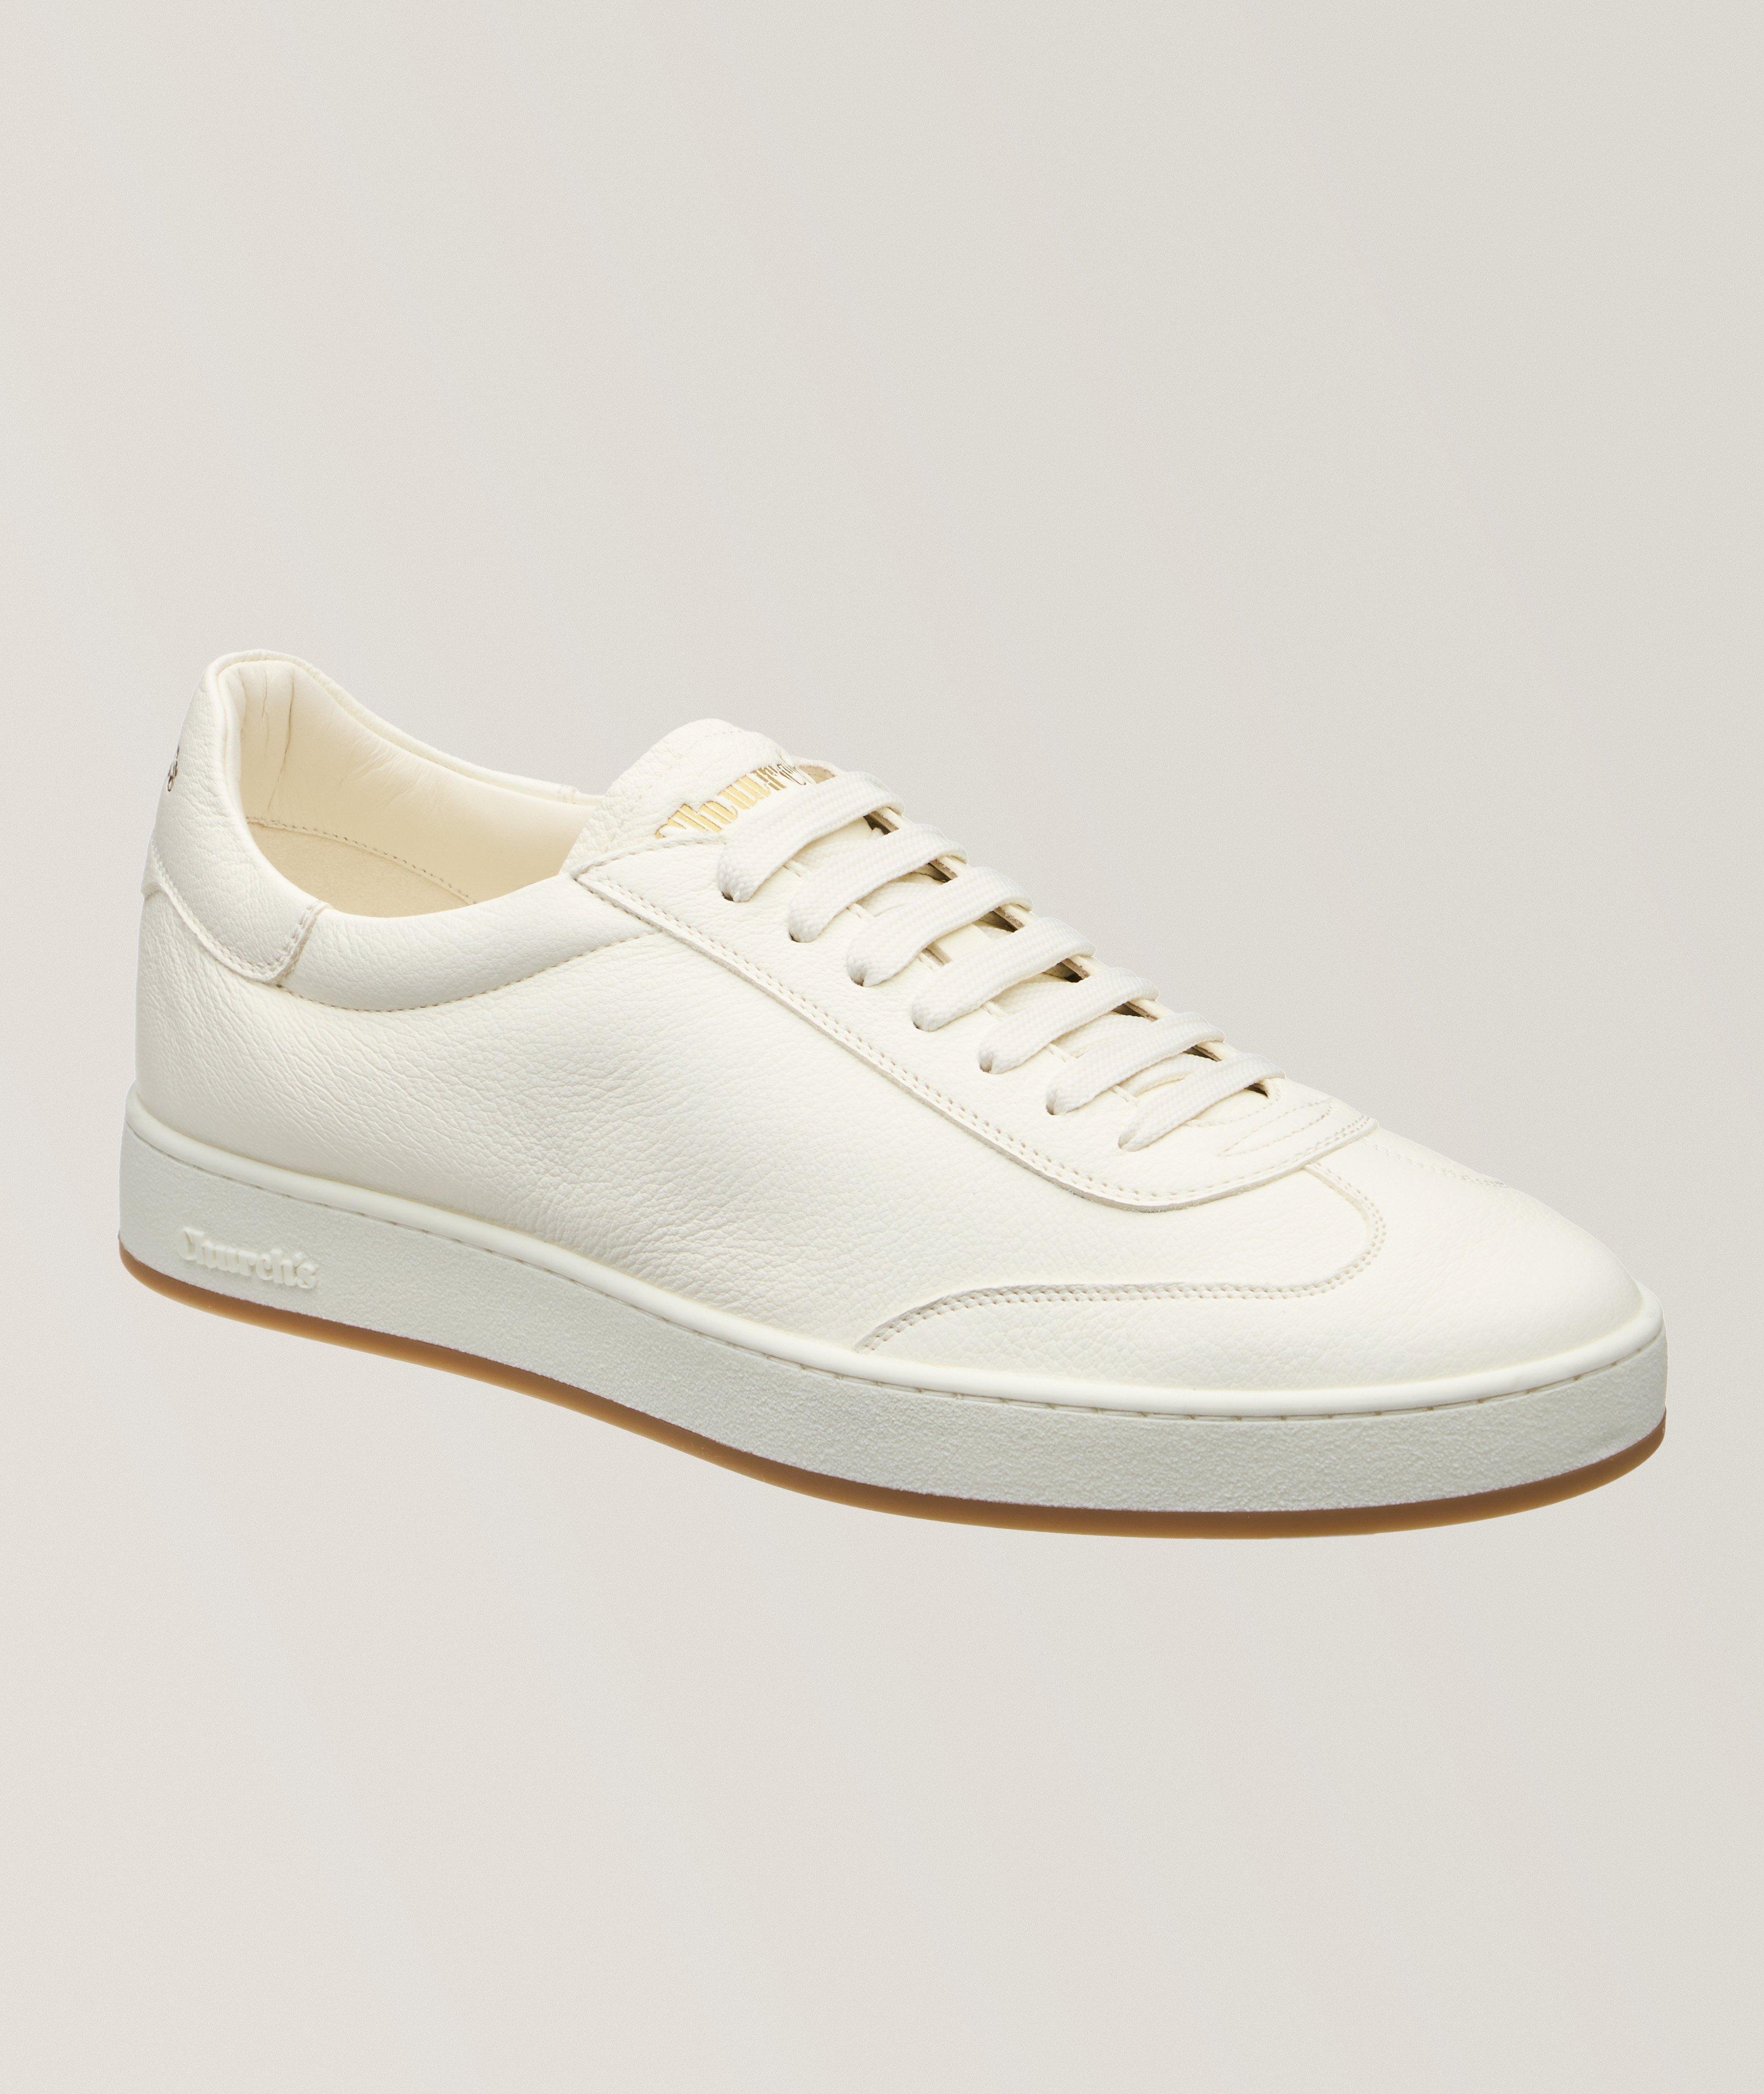 Largs 2 Leather Sneakers